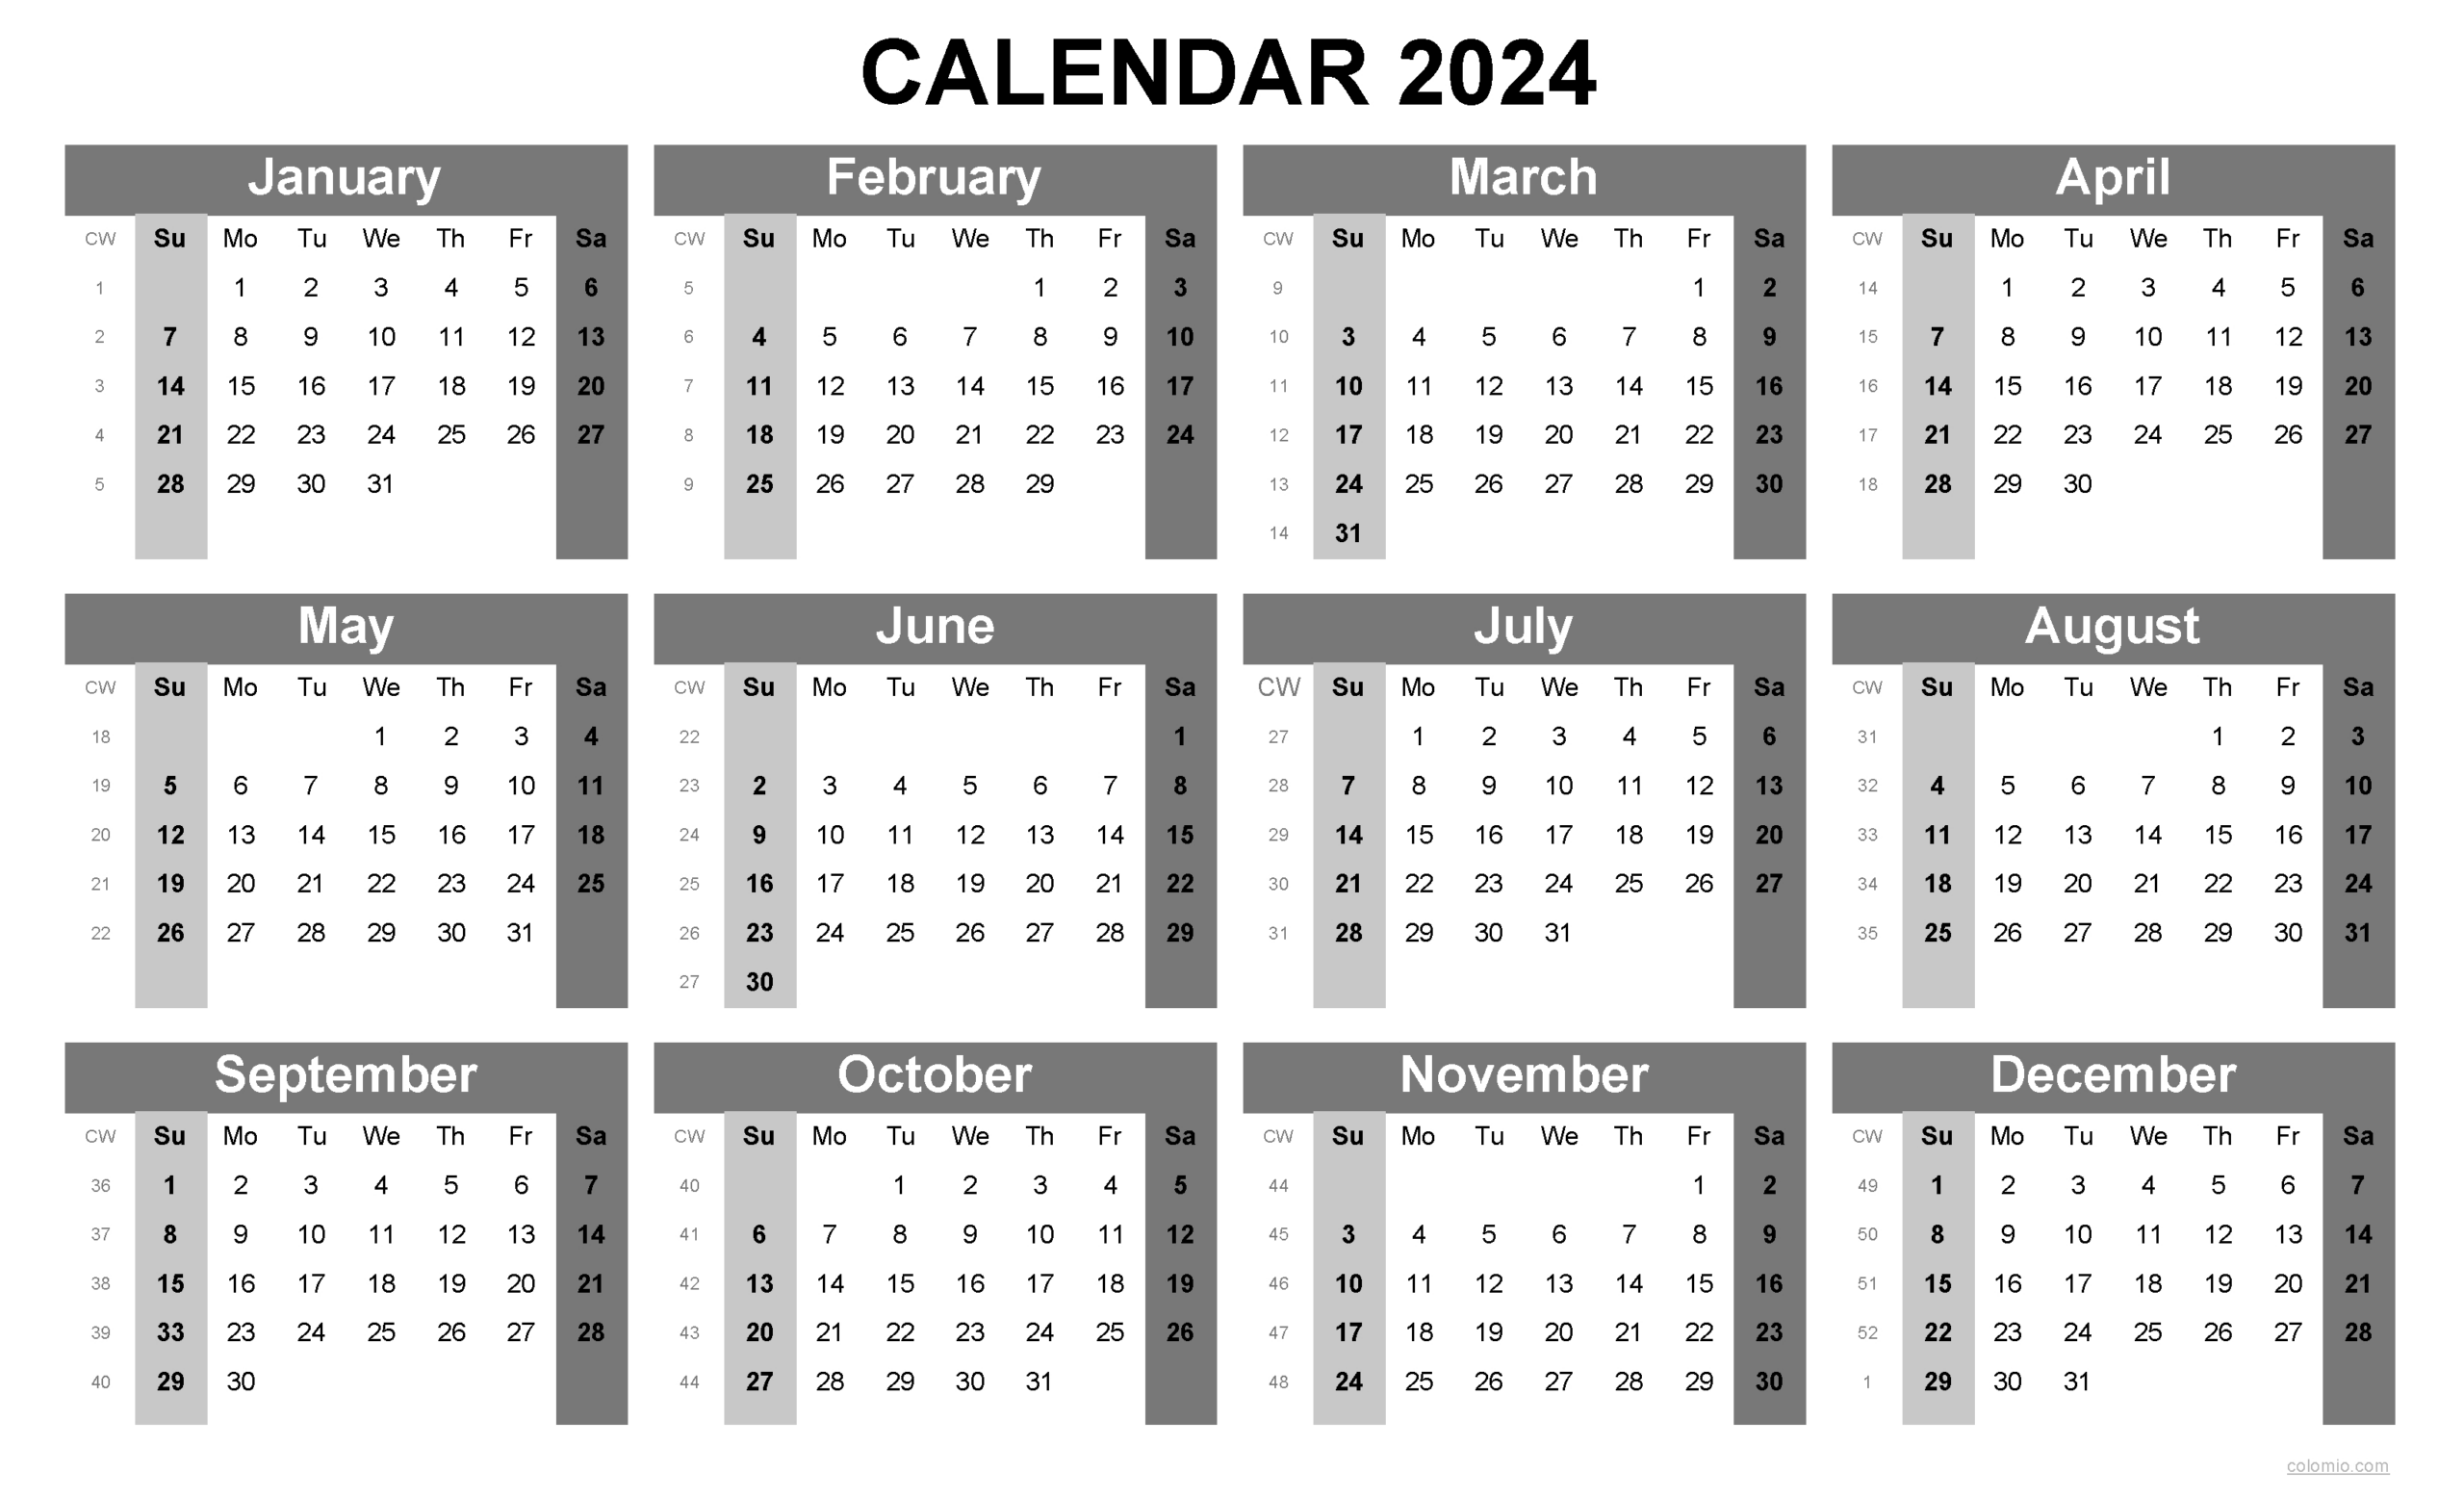 2024 Calendar Printable, ✓ Pdf, Excel And Image File - Free for Free Printable Calendar 2024 Schedule